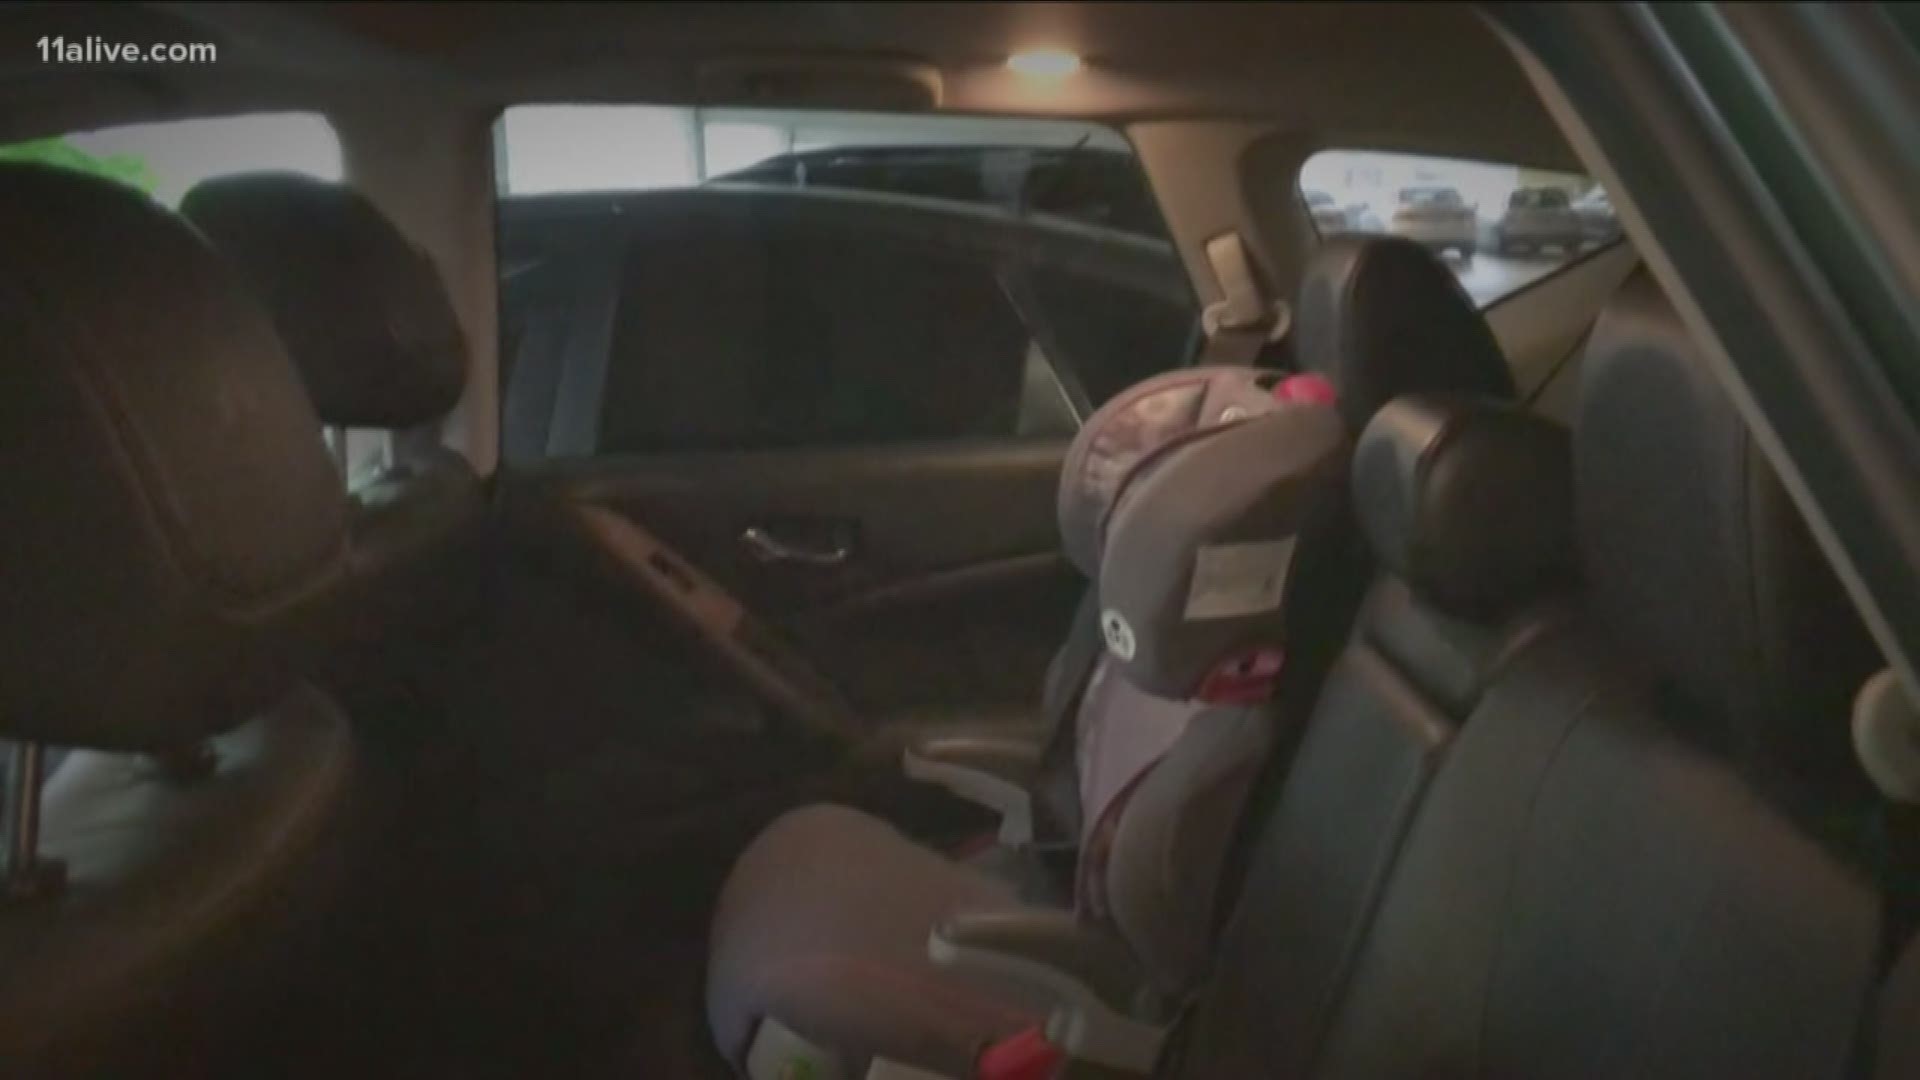 The day aims to encourage parents and caregivers to check the backseat for any children.